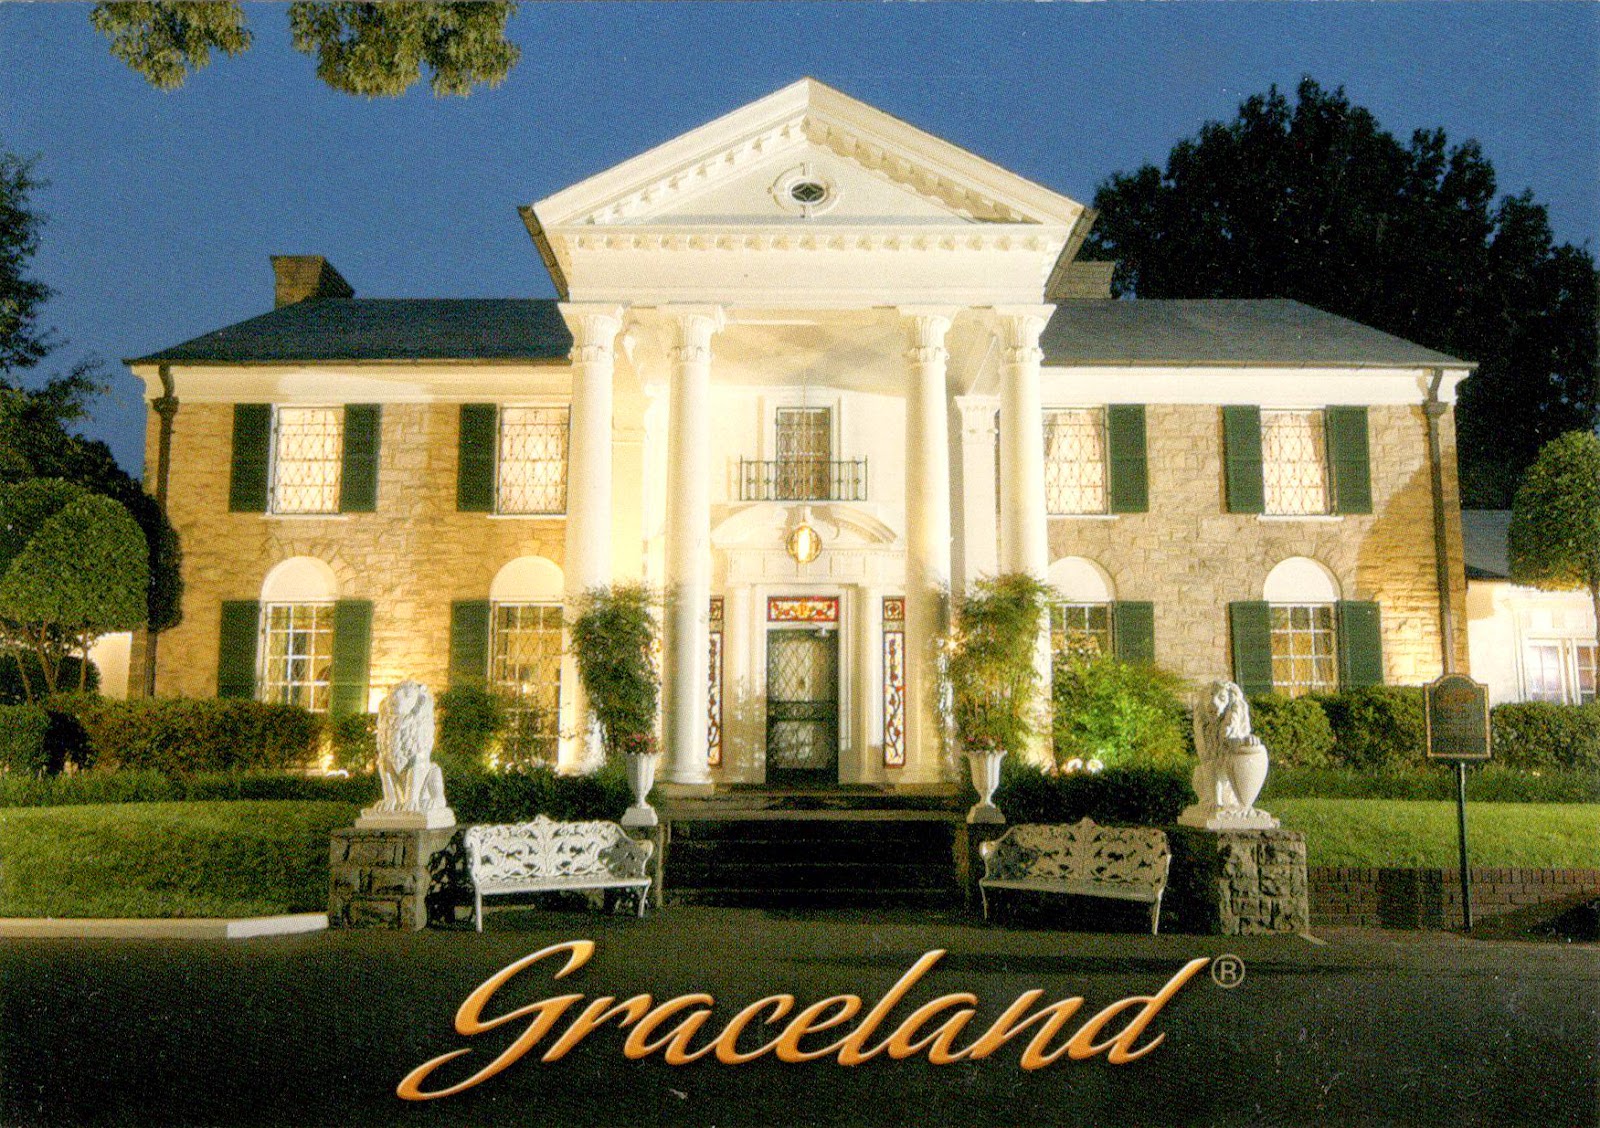 WORLD, COME TO MY HOME!: 1554 UNITED STATES (Tennessee) - Graceland